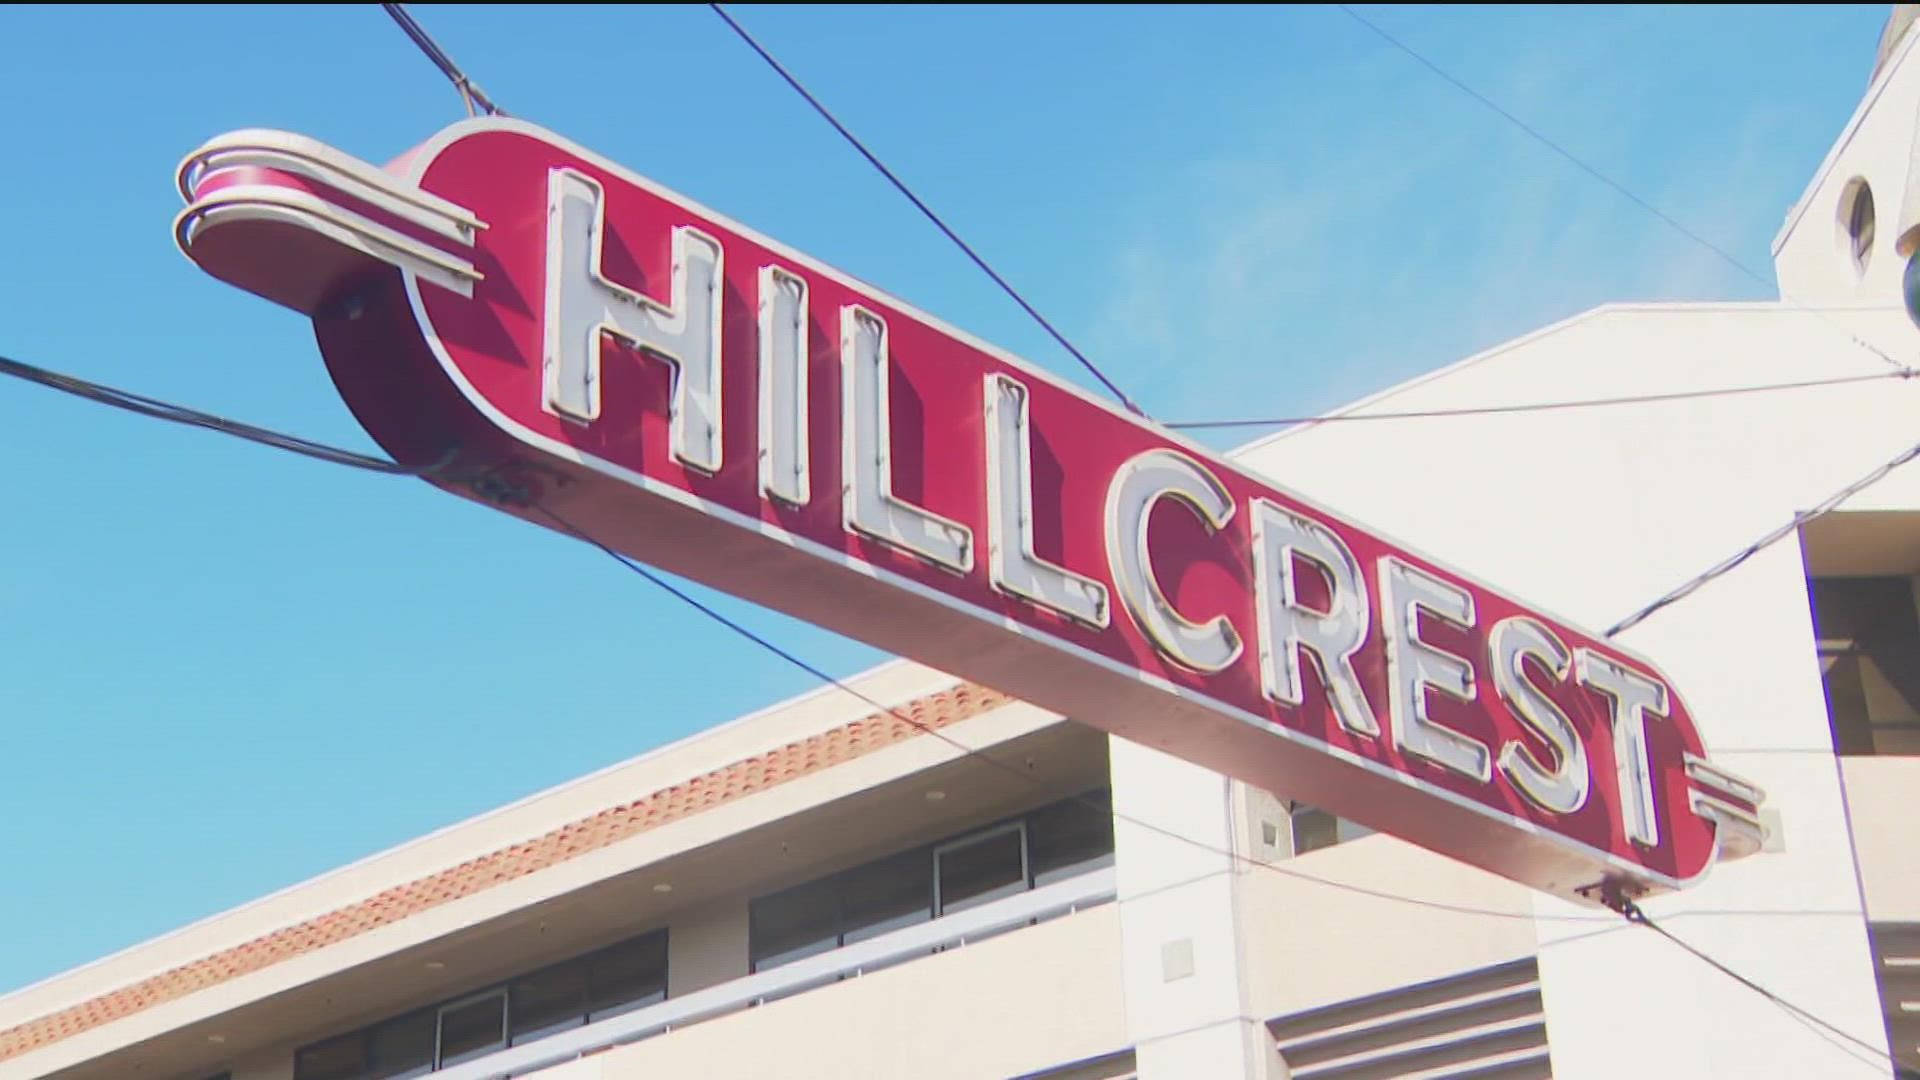 Viewers have been contacting CBS 8 asking why the iconic sign hasn't been lit up lately. We talked to the group that maintains the sign to find out why.